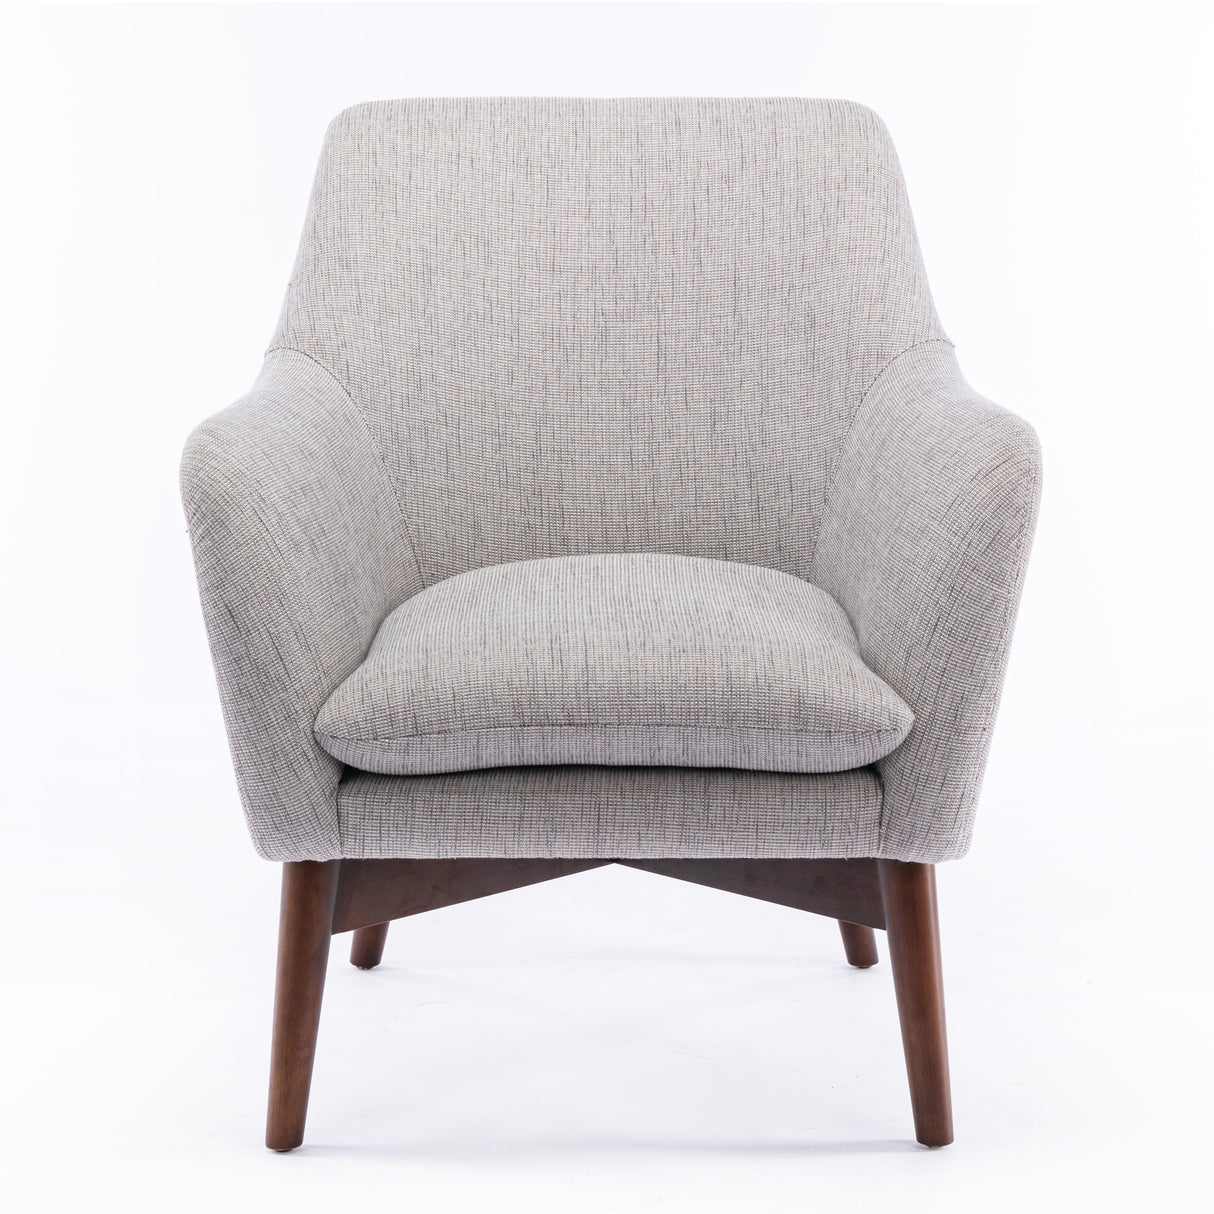 Parkton Accent Chair in Performance Fabric - Sea Oat - Home Elegance USA